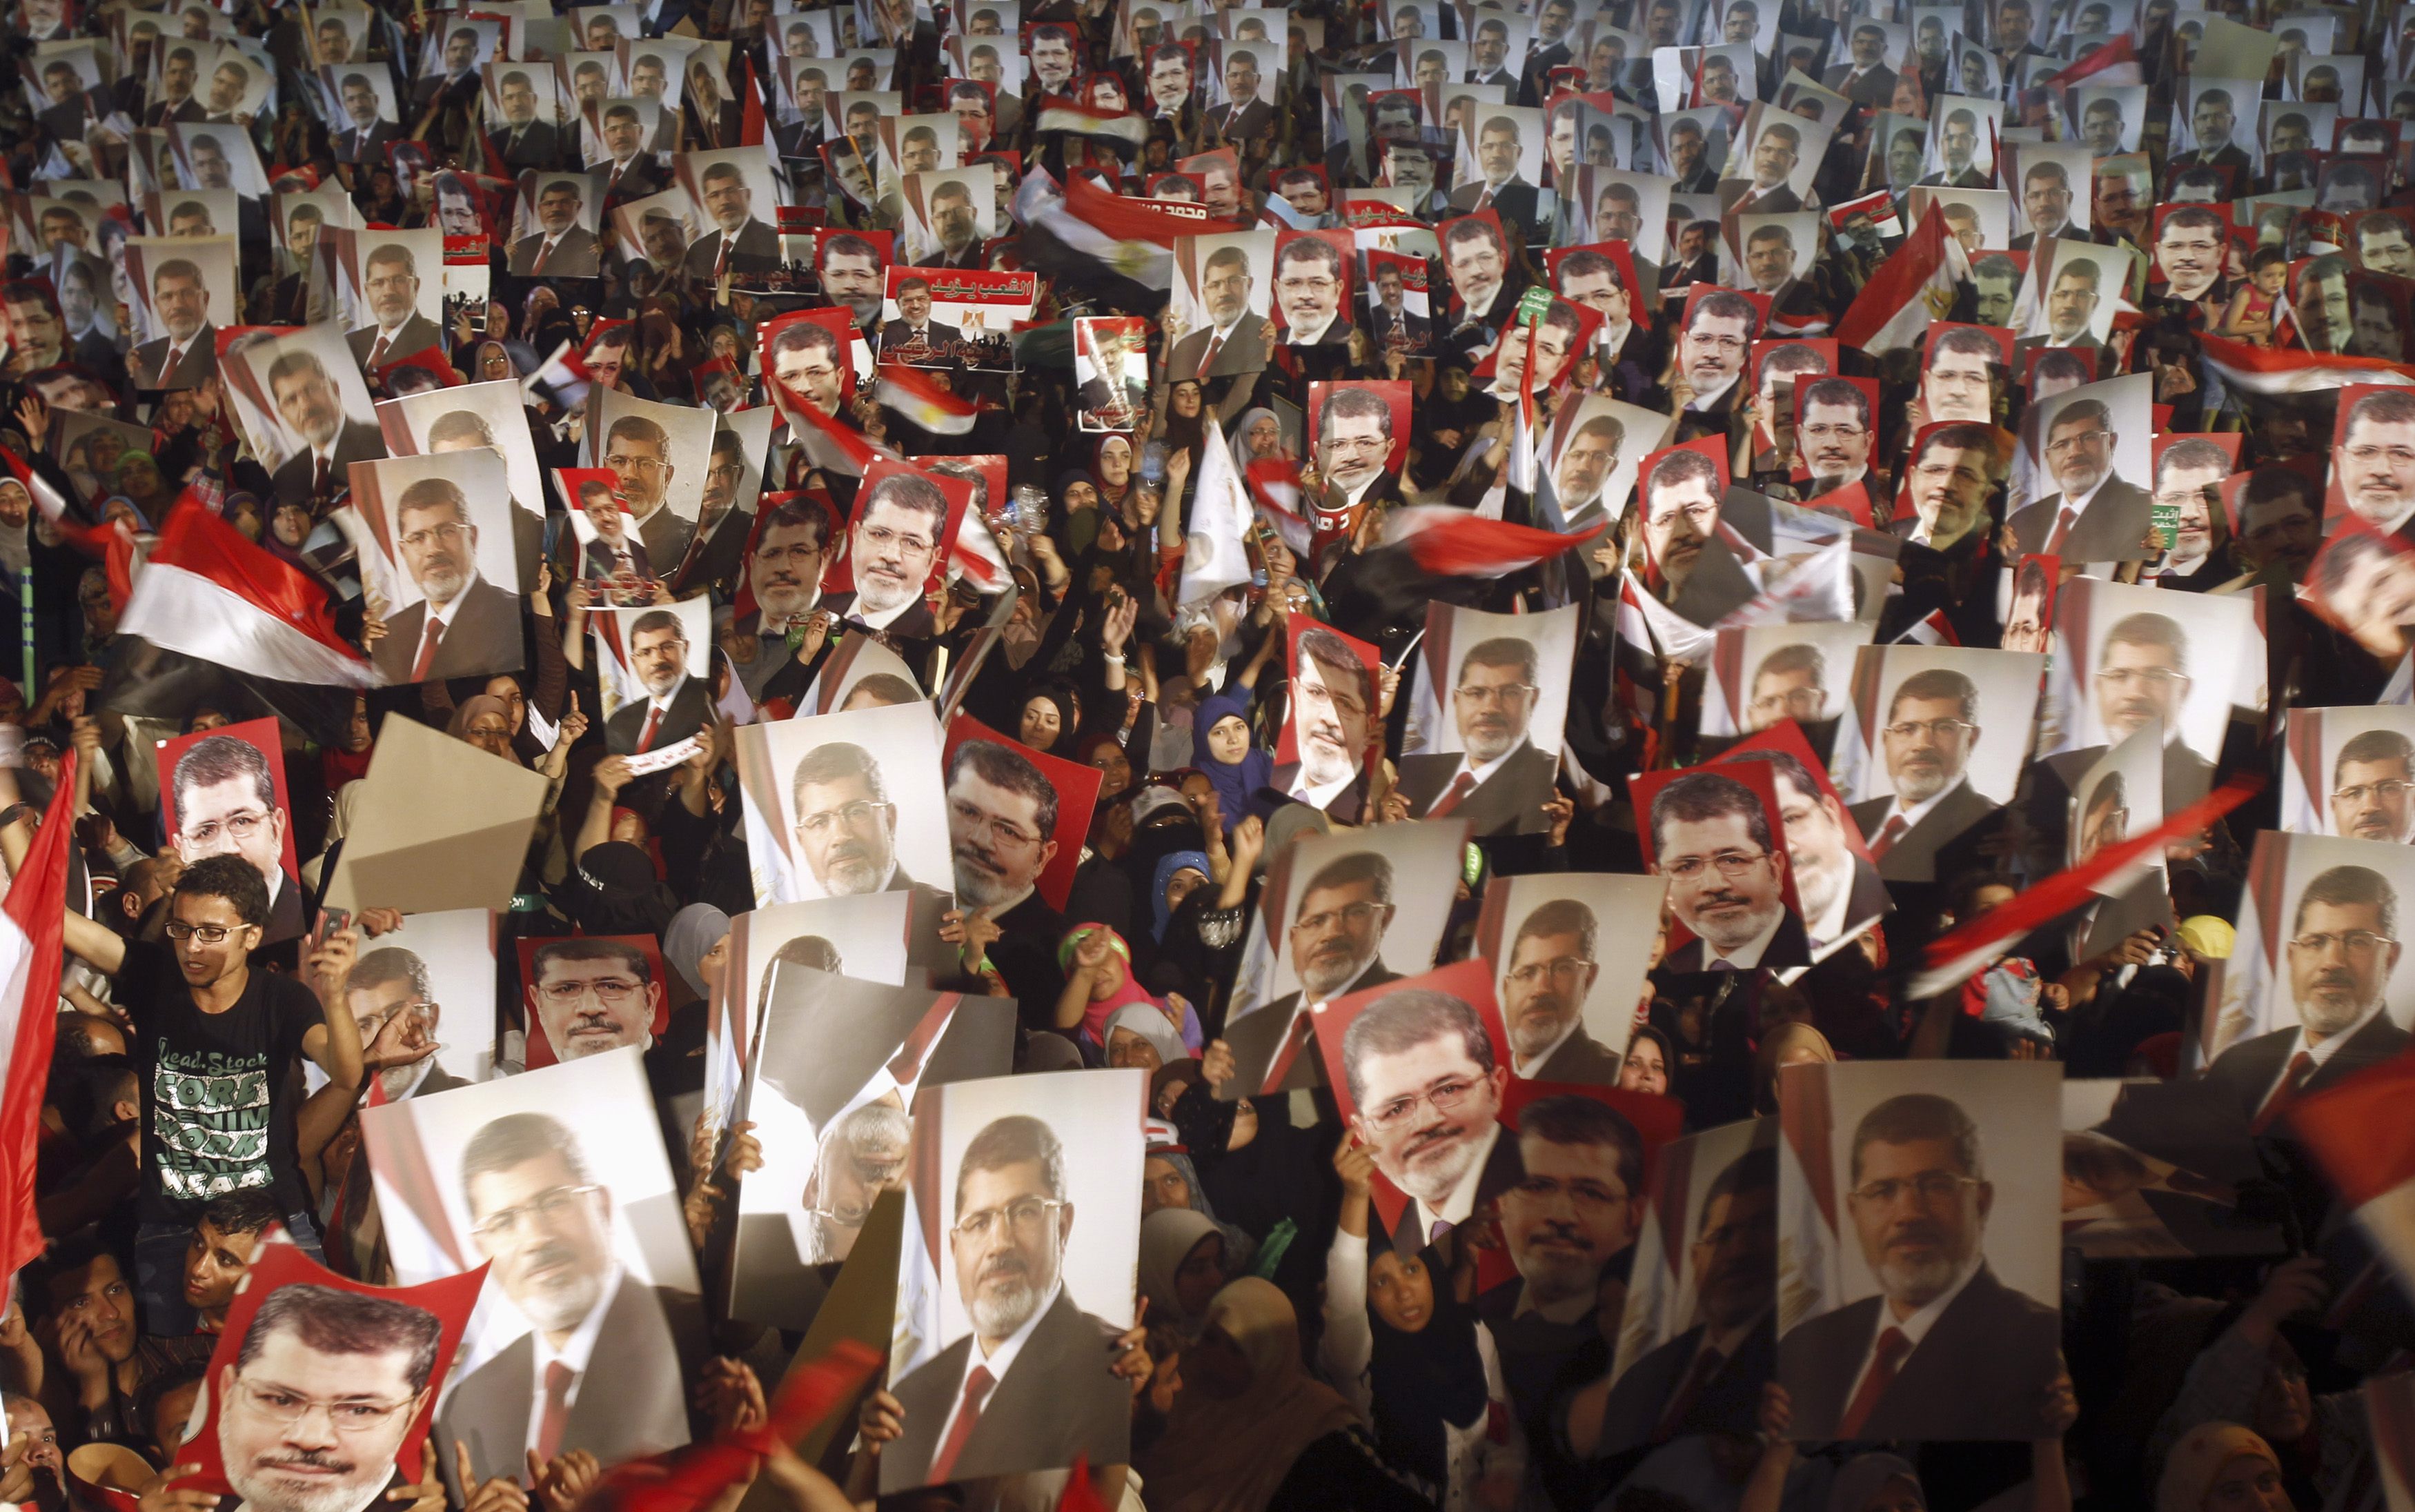 After its takeover, Egypt's military moved swiftly to shut down coverage of pro-Morsi events such as this rally in Cairo on 3 July